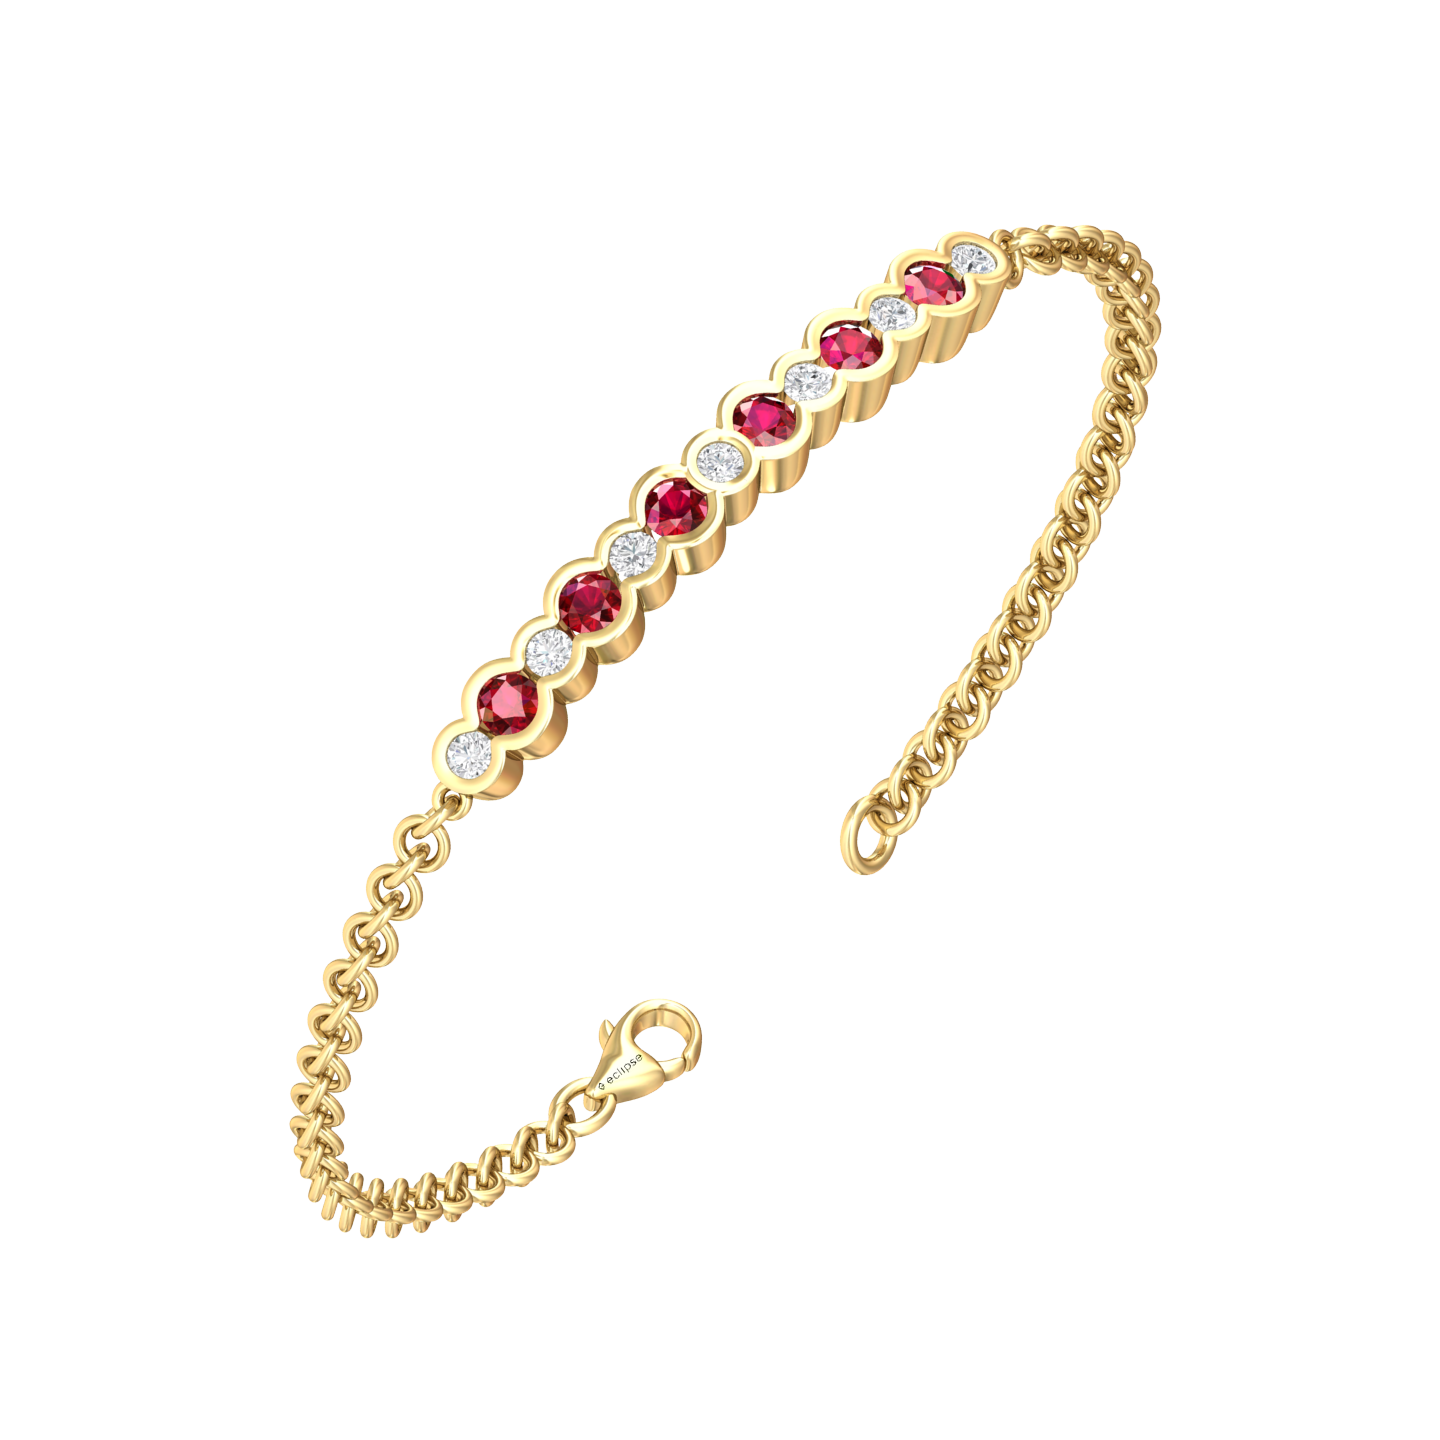 Eclipse Collection Ruby and Diamond Bracelet  Gardiner Brothers 18ct Yellow Gold  